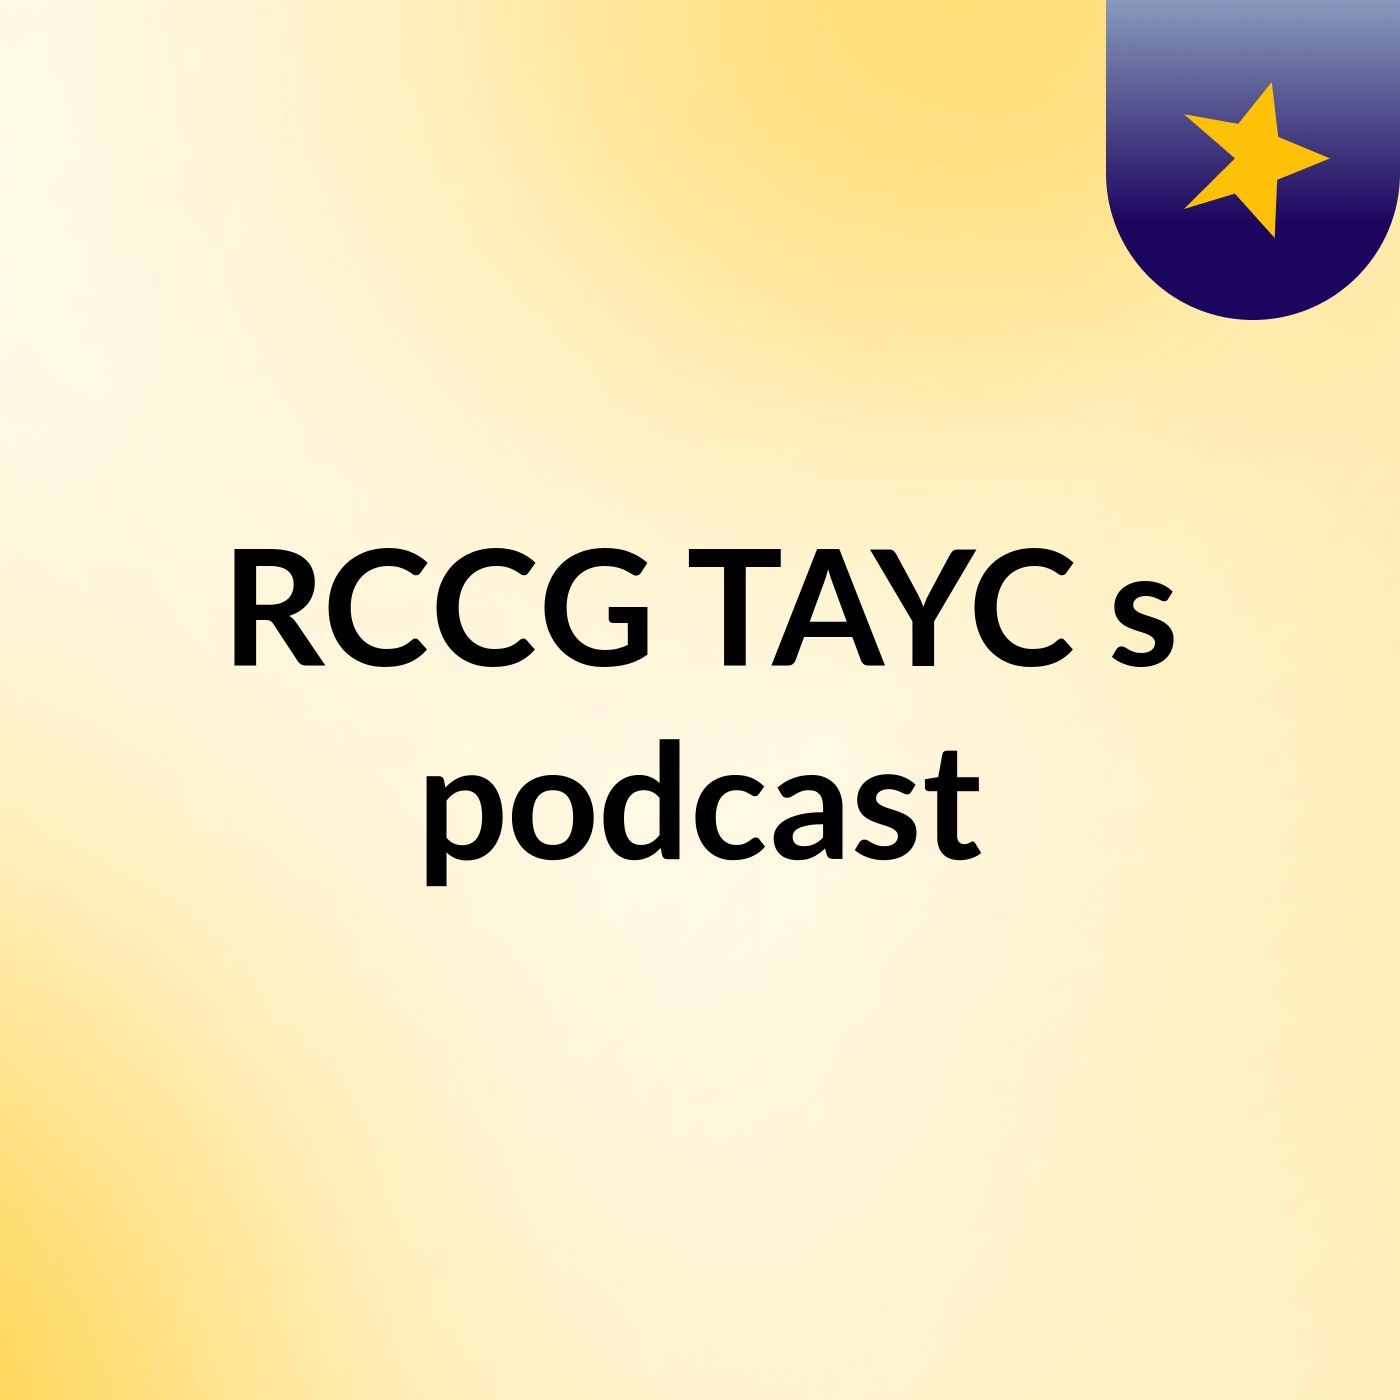 Episode 2 - RCCG TAYC's podcast